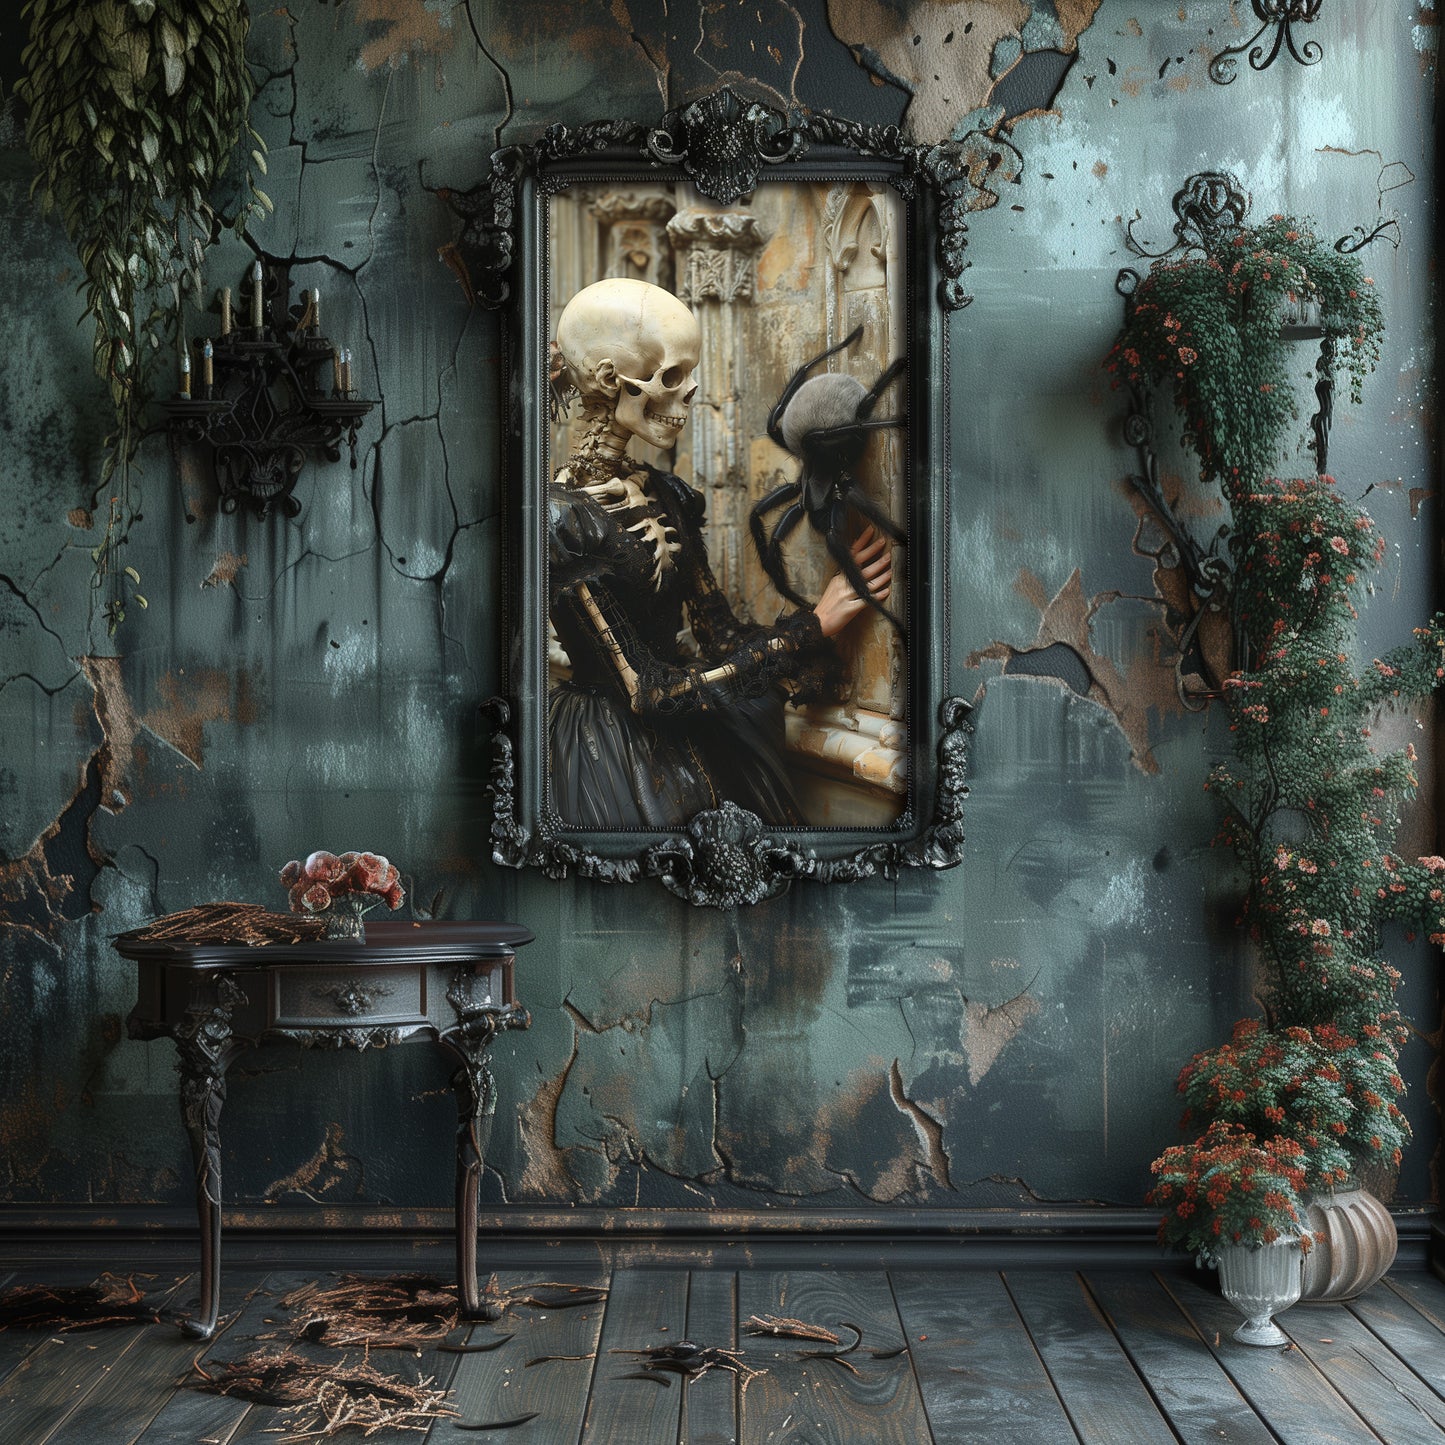 Skeletal Beauty Meets Adorable Spider - Gothic Wall Art